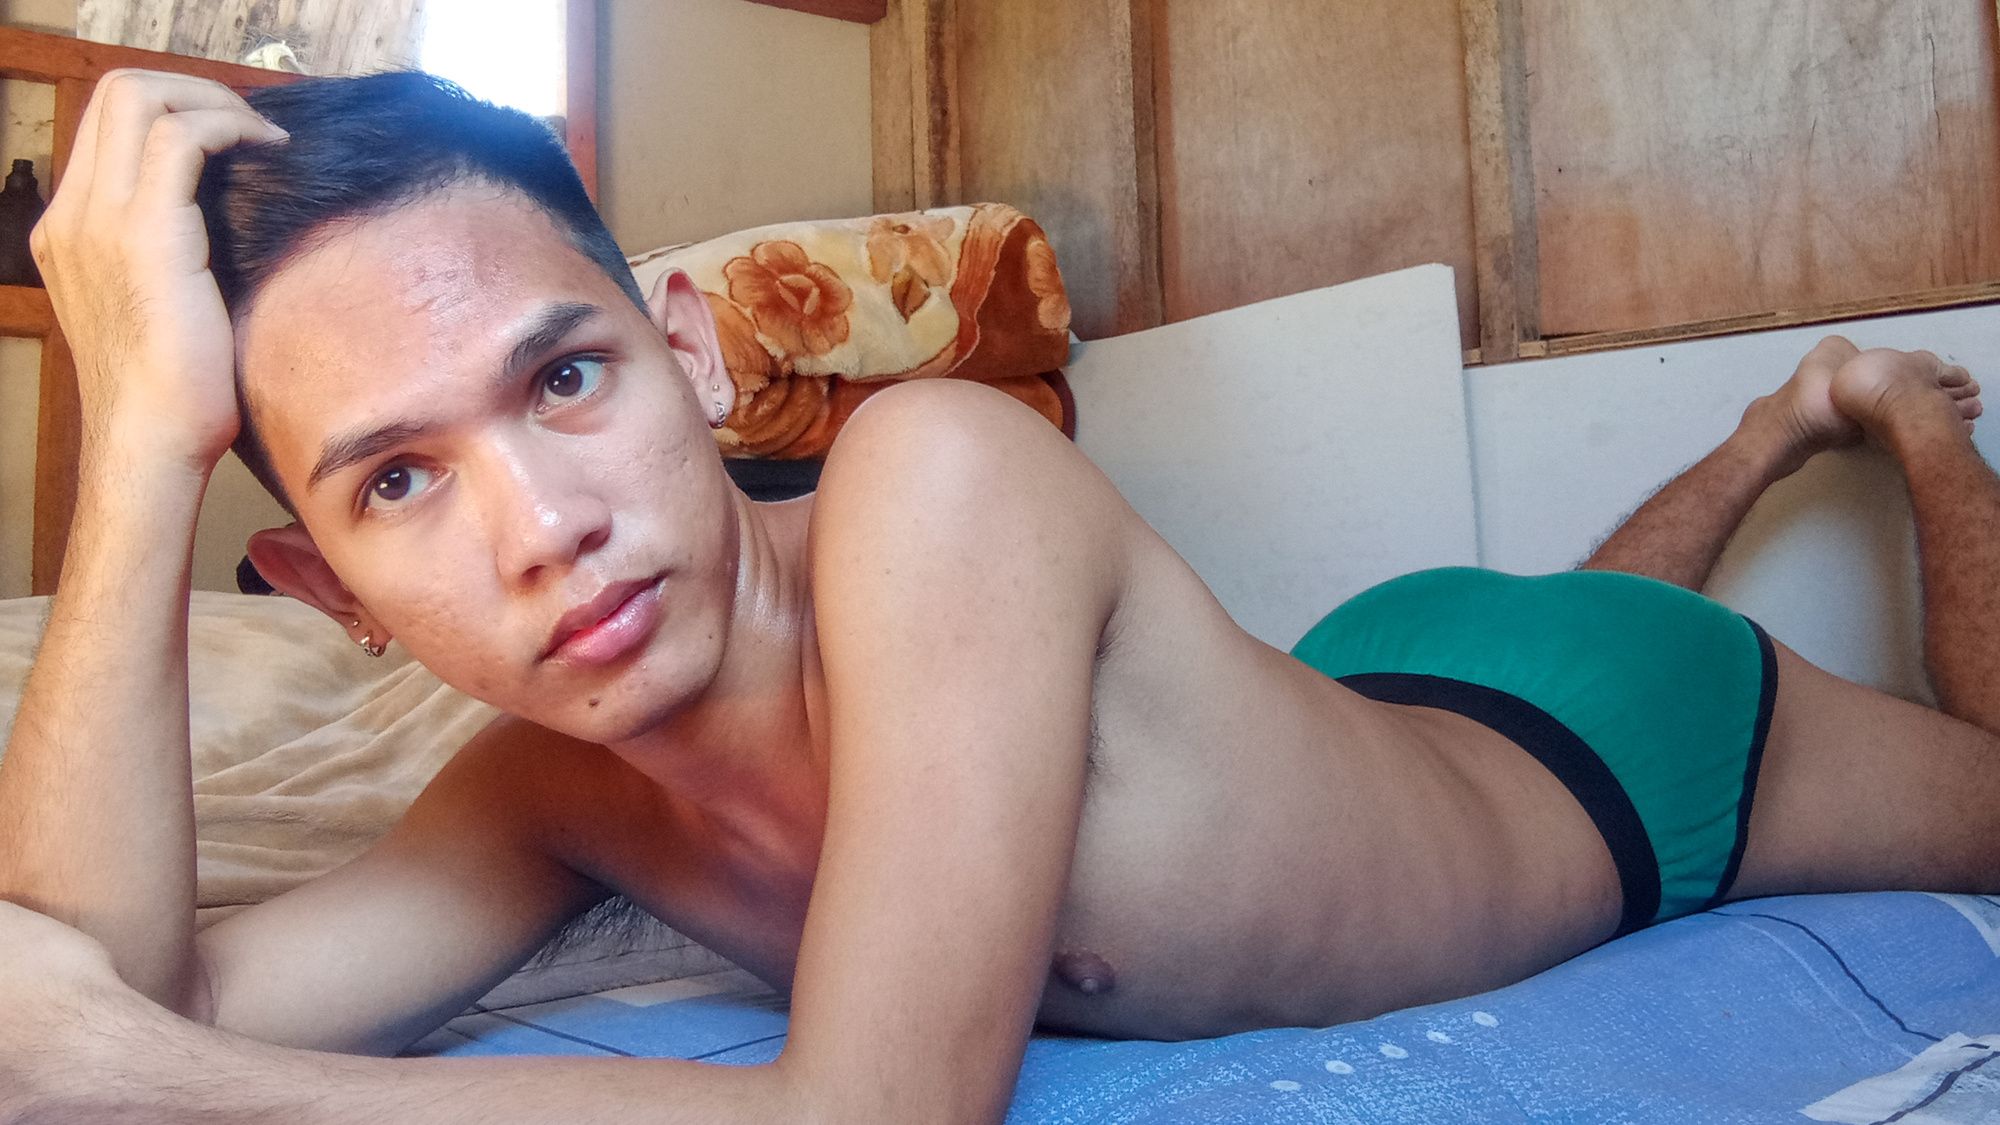 Muscled asian twink spreads his furry legs in bed #7